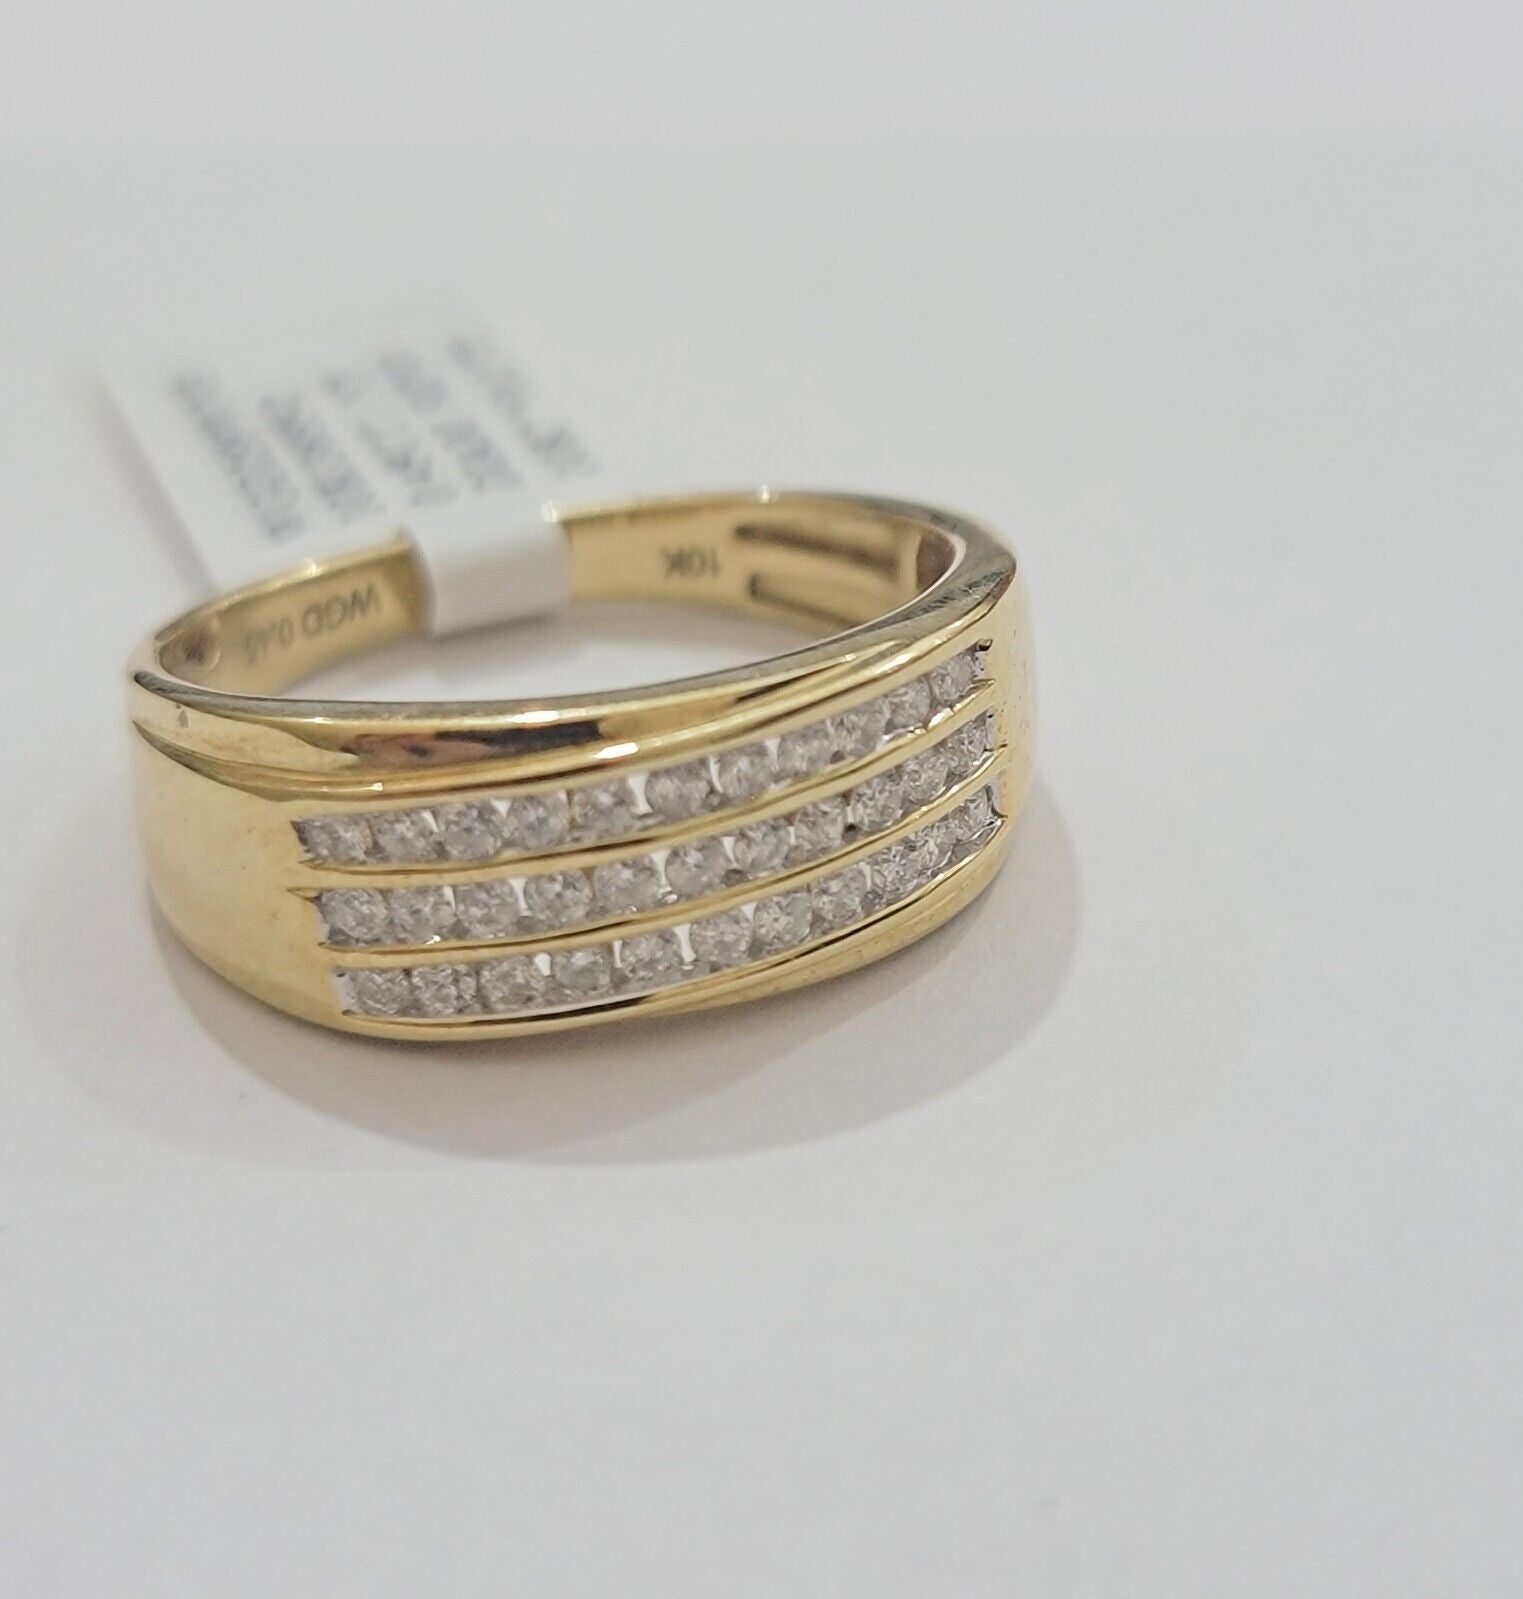 Real 10k Yellow Gold Diamond Mens Ring Band Wedding Engagement, Unique, Genuine